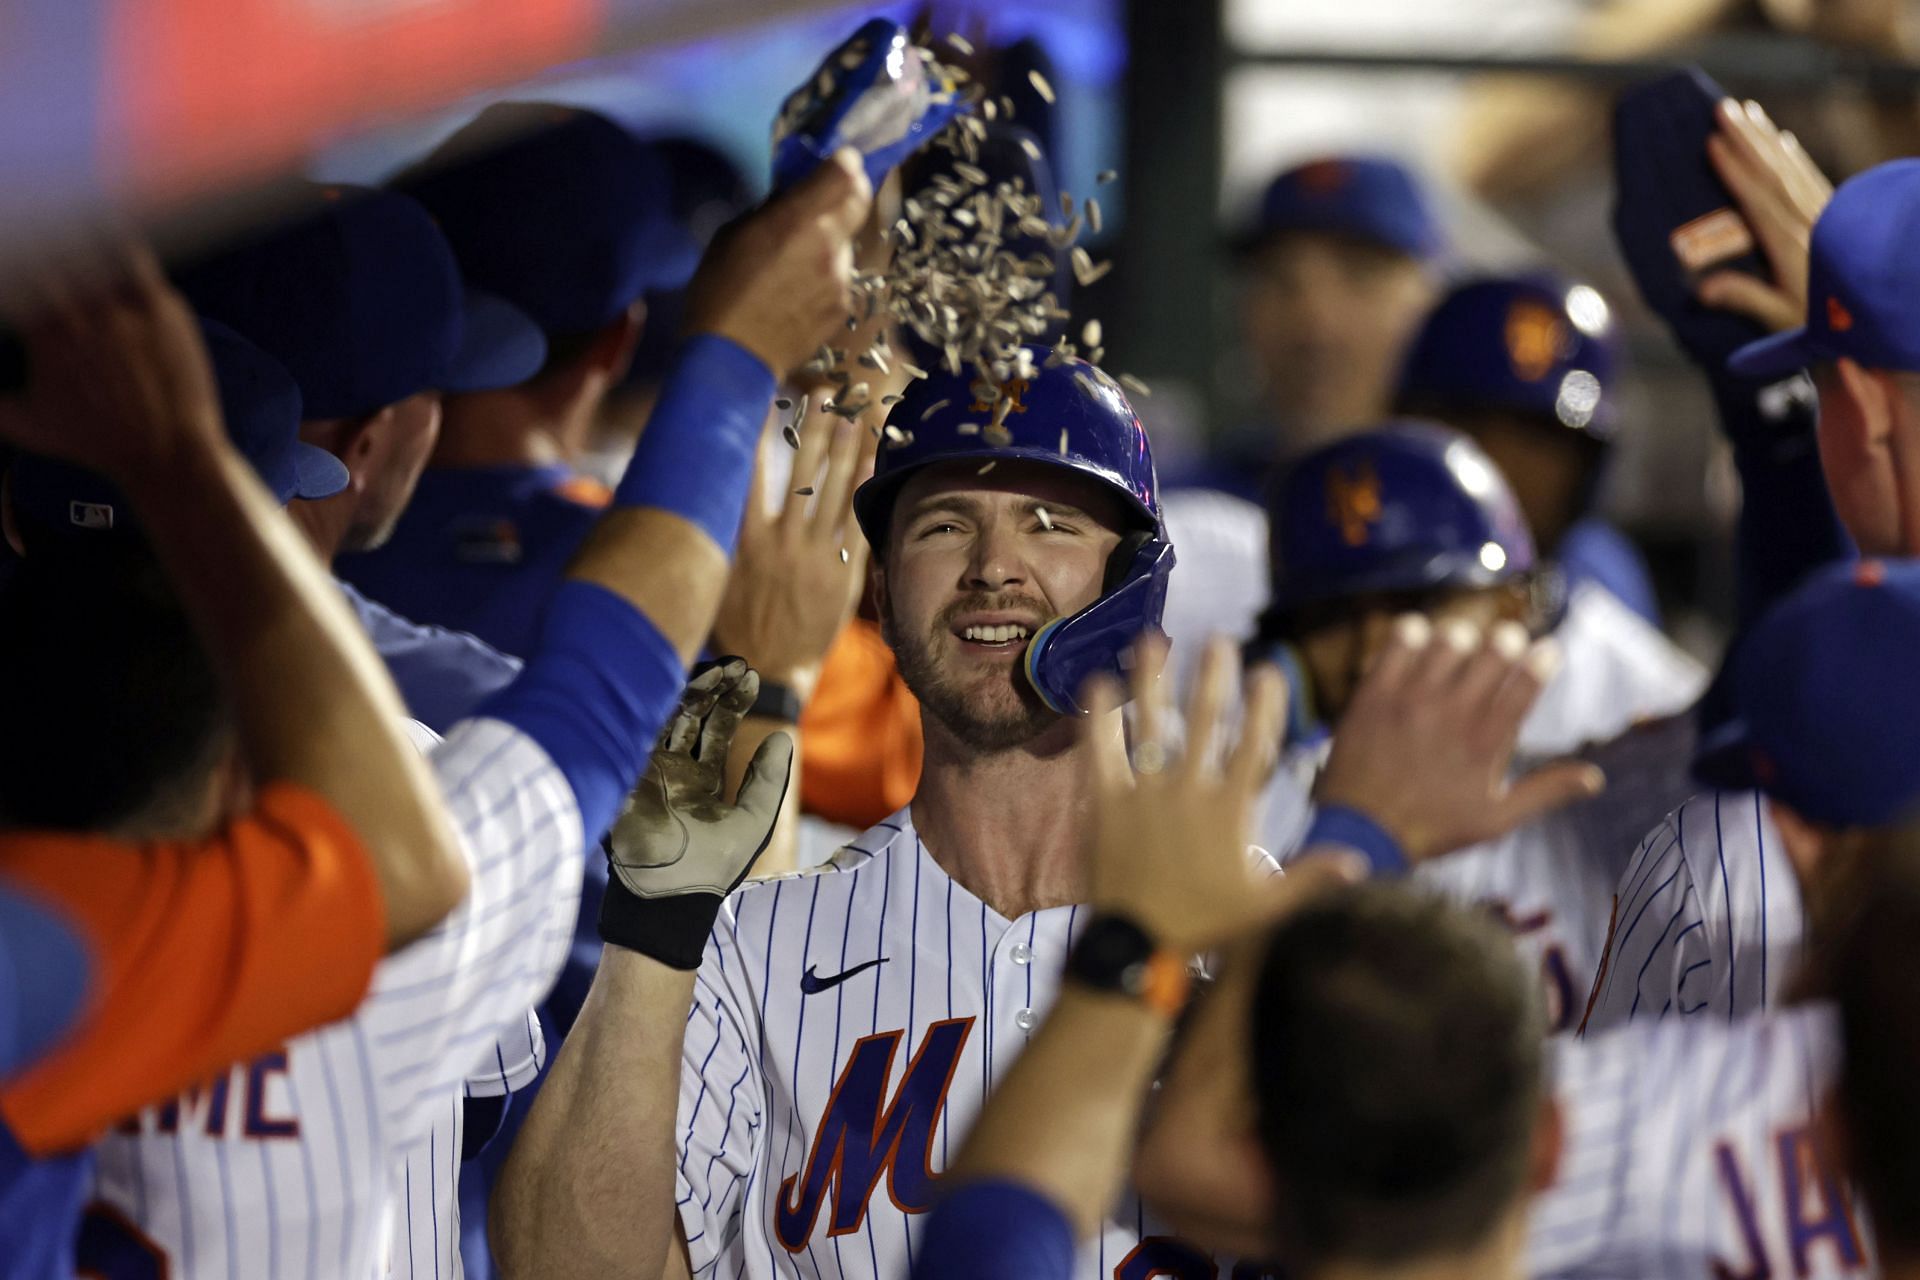 Pete Alonso has 26 home runs on the year.